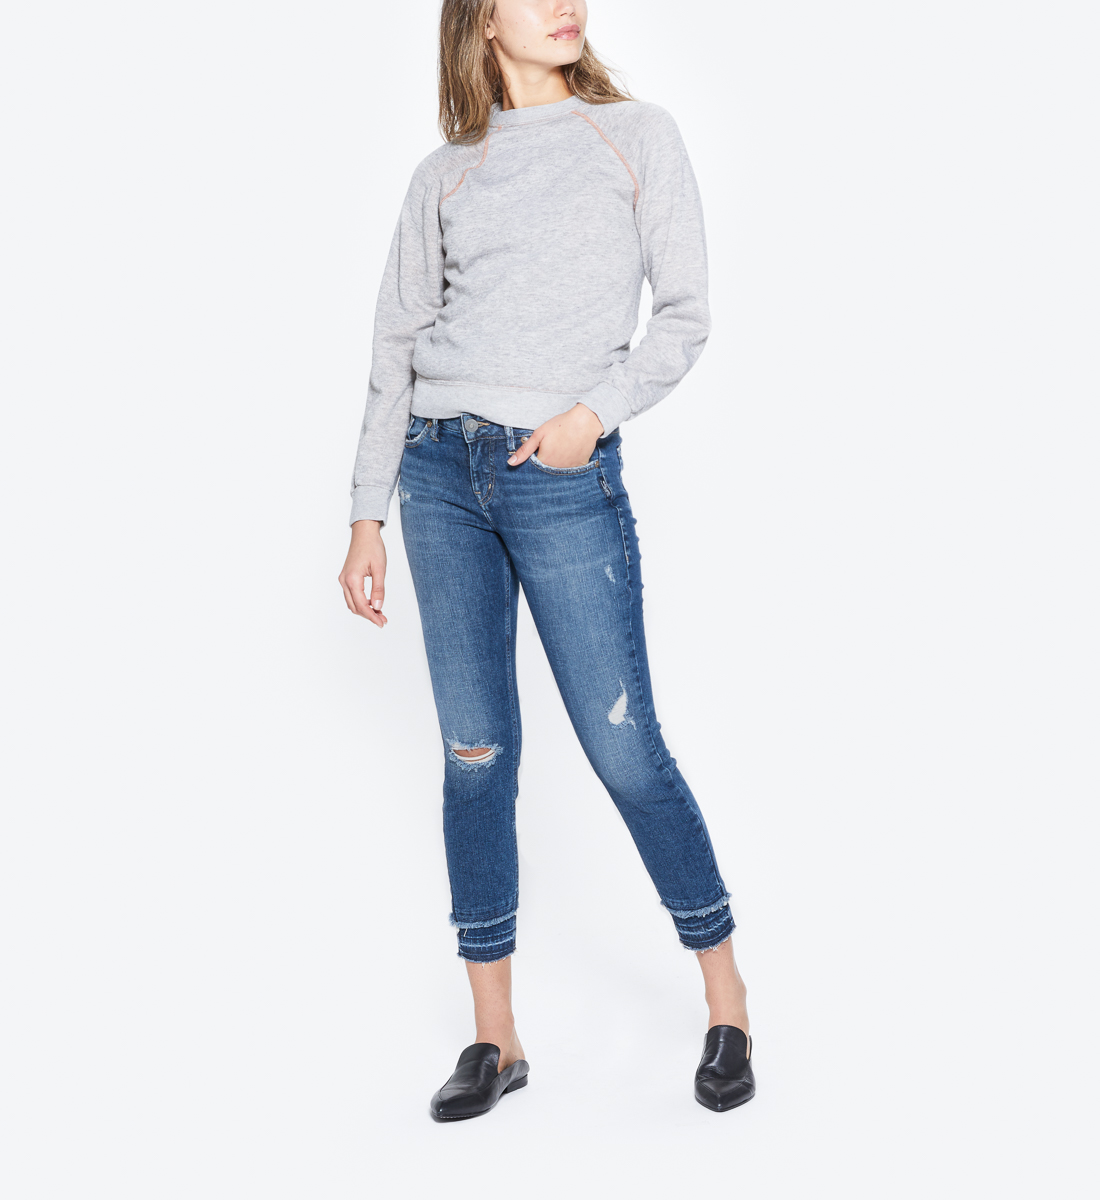 silver jeans aiko mid skinny